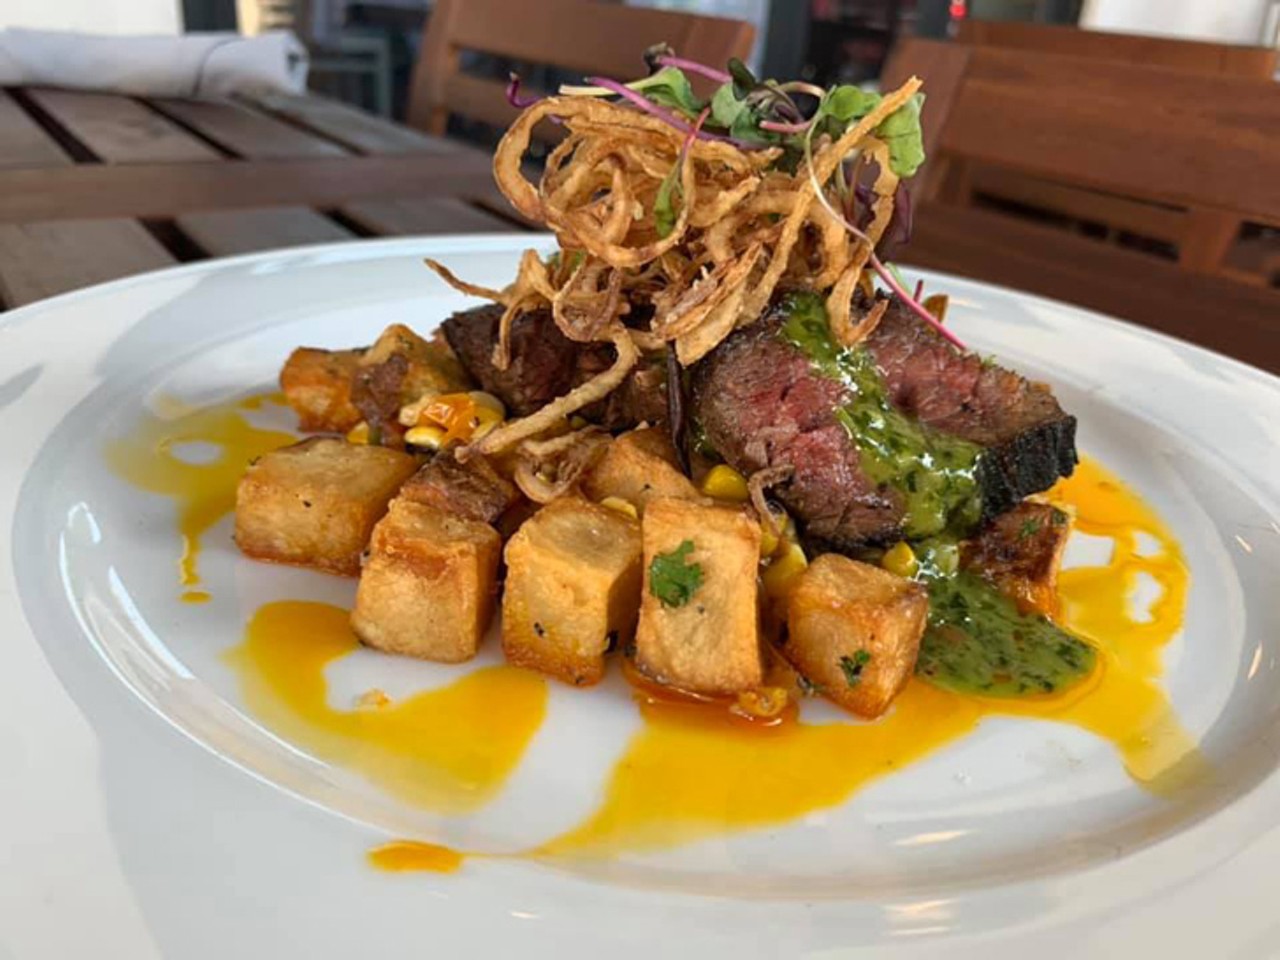 Notable 2019 opening: Dexter&#146;s New Standard  
1035 N Orlando Ave., Winter Park, 407-629-1150
A new location and a fresh take on the old Dexter&#146;s Winter Park, now in a new locations and offering main courses like eggplant Napoleon, clearwater barrel fish, roast chicken, bone-in ribeye and the DNS Burger, with Swiss cheese, pickle, garlic aioli, dijon, fried shallot, and hand cut fries. Ingredients are sourced from local farms and producers, including Waterkist Farms in Sanford, Zenn Naturals in Mascotte, Frog Song Organics in Ocala and Nearby Naturals in downtown Orlando.
Photo via Dexter&#146;s New Standard/Facebook